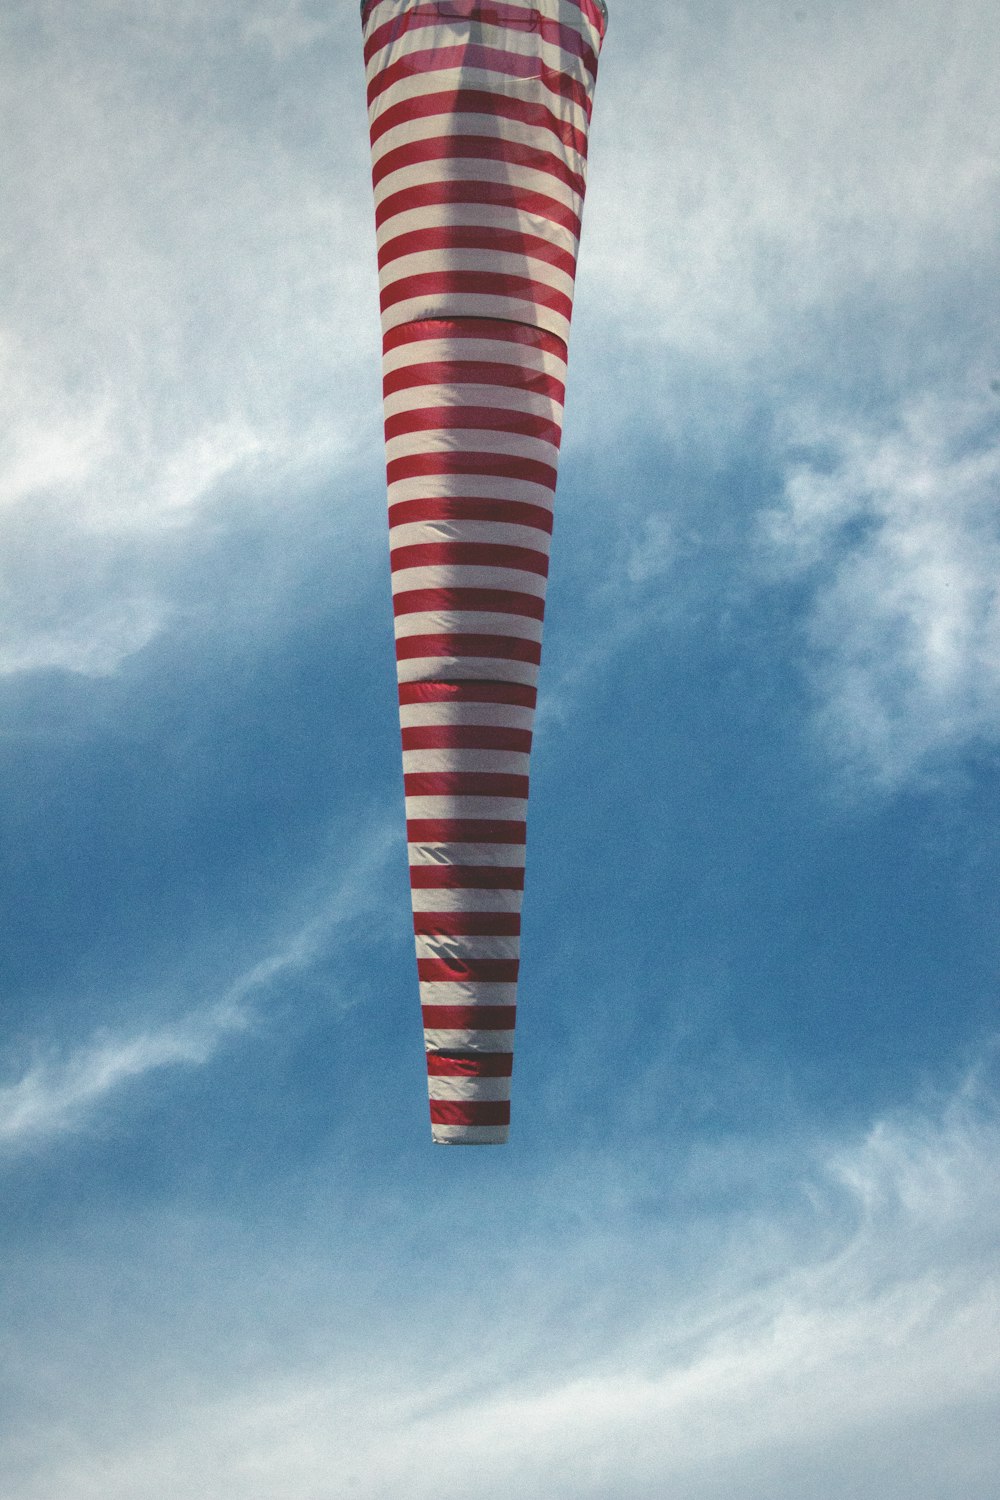 red and white striped hot air balloo under blue and white sky